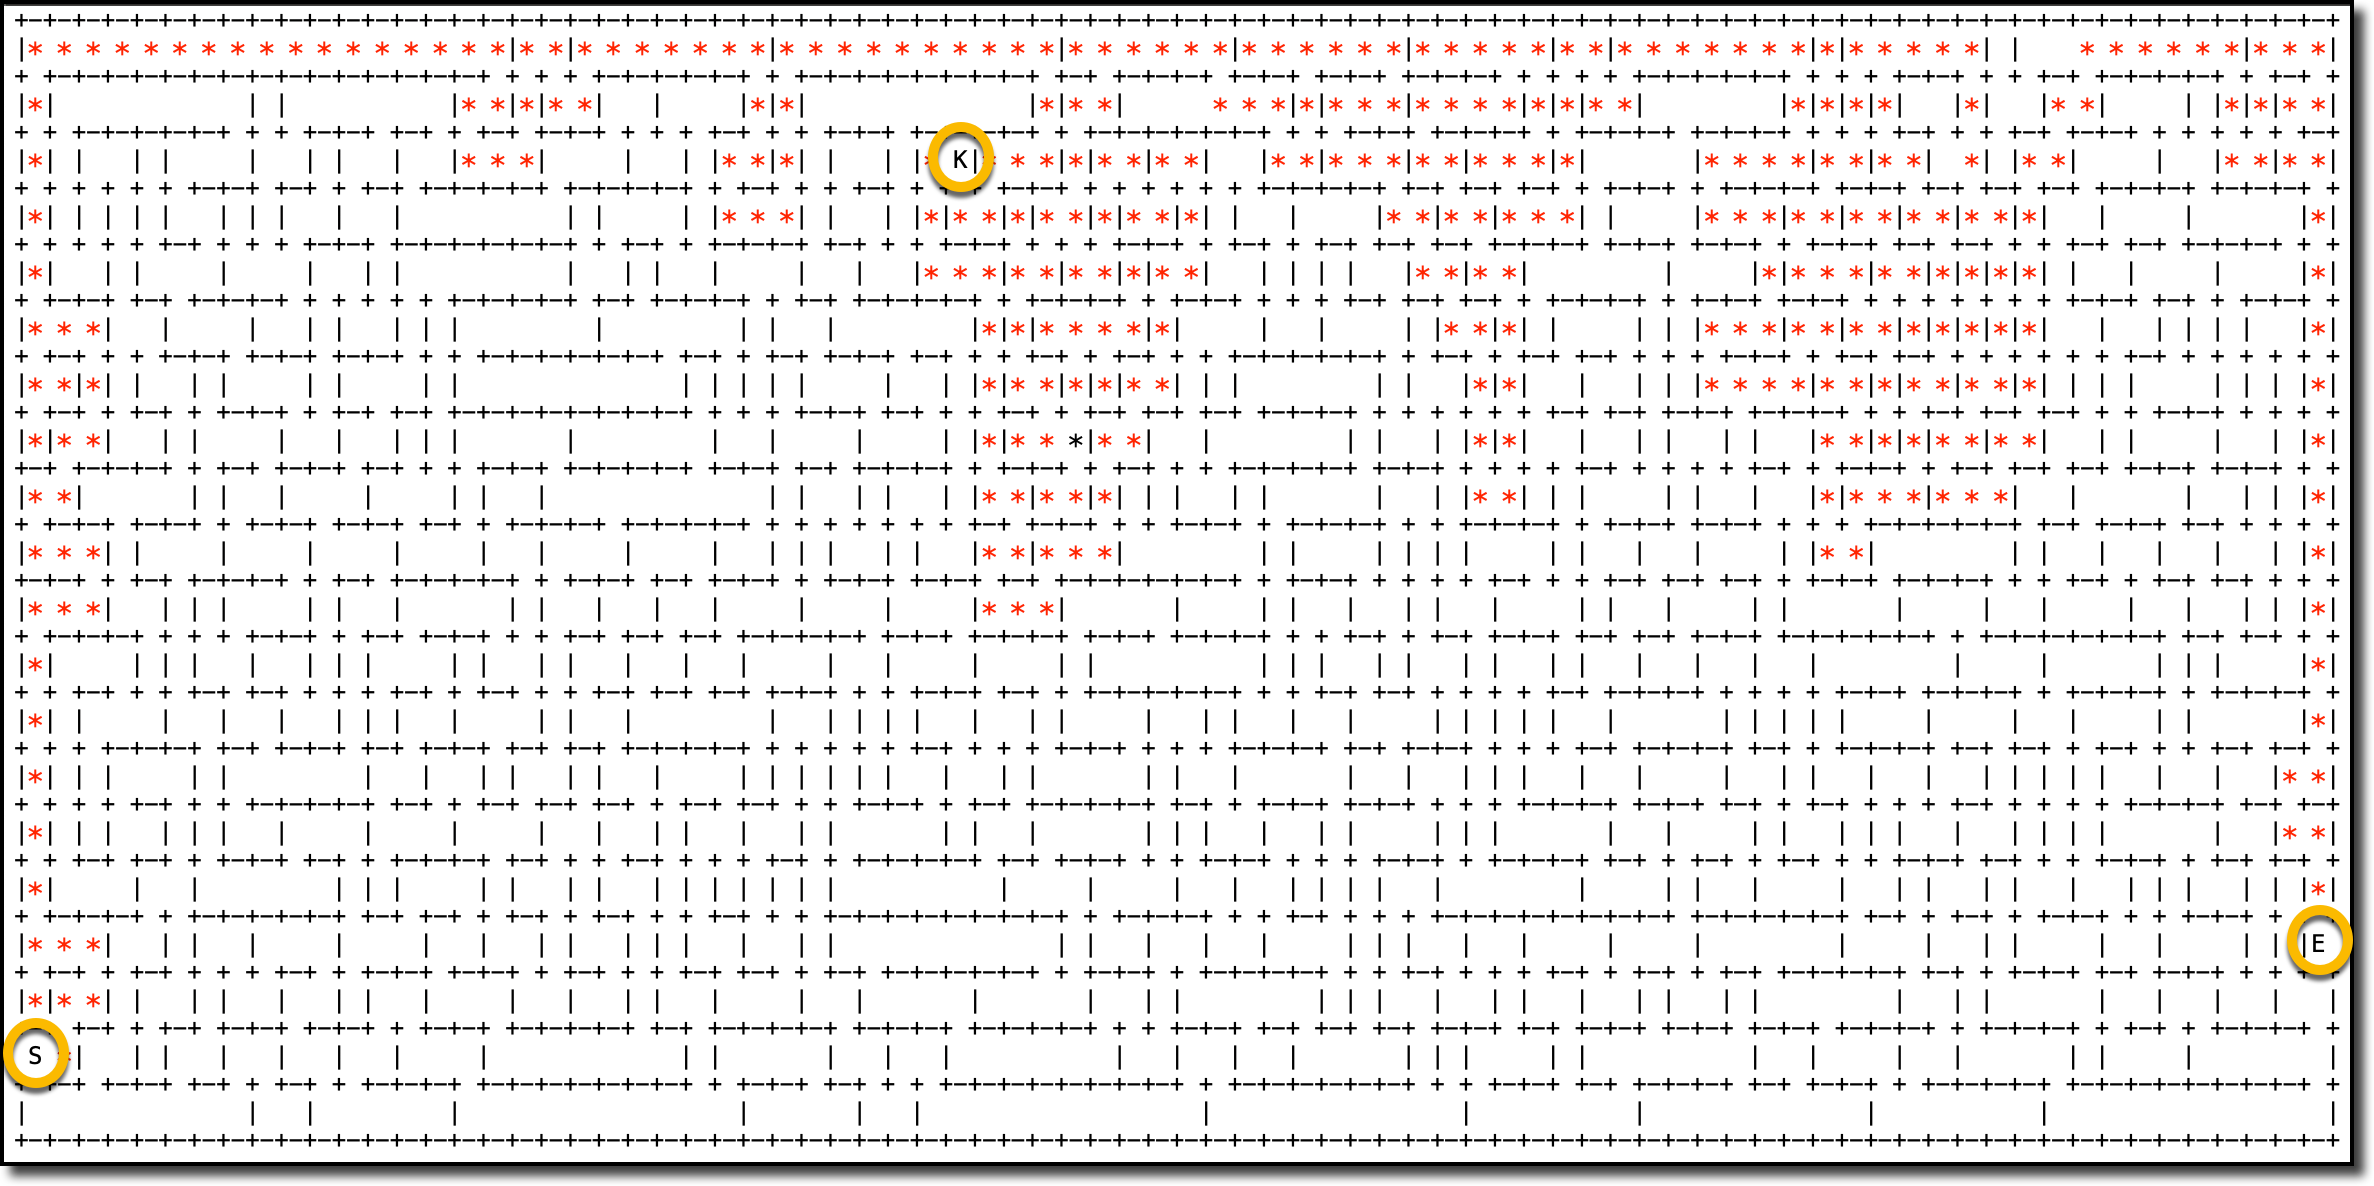 ASCII-based map of the solved maze.